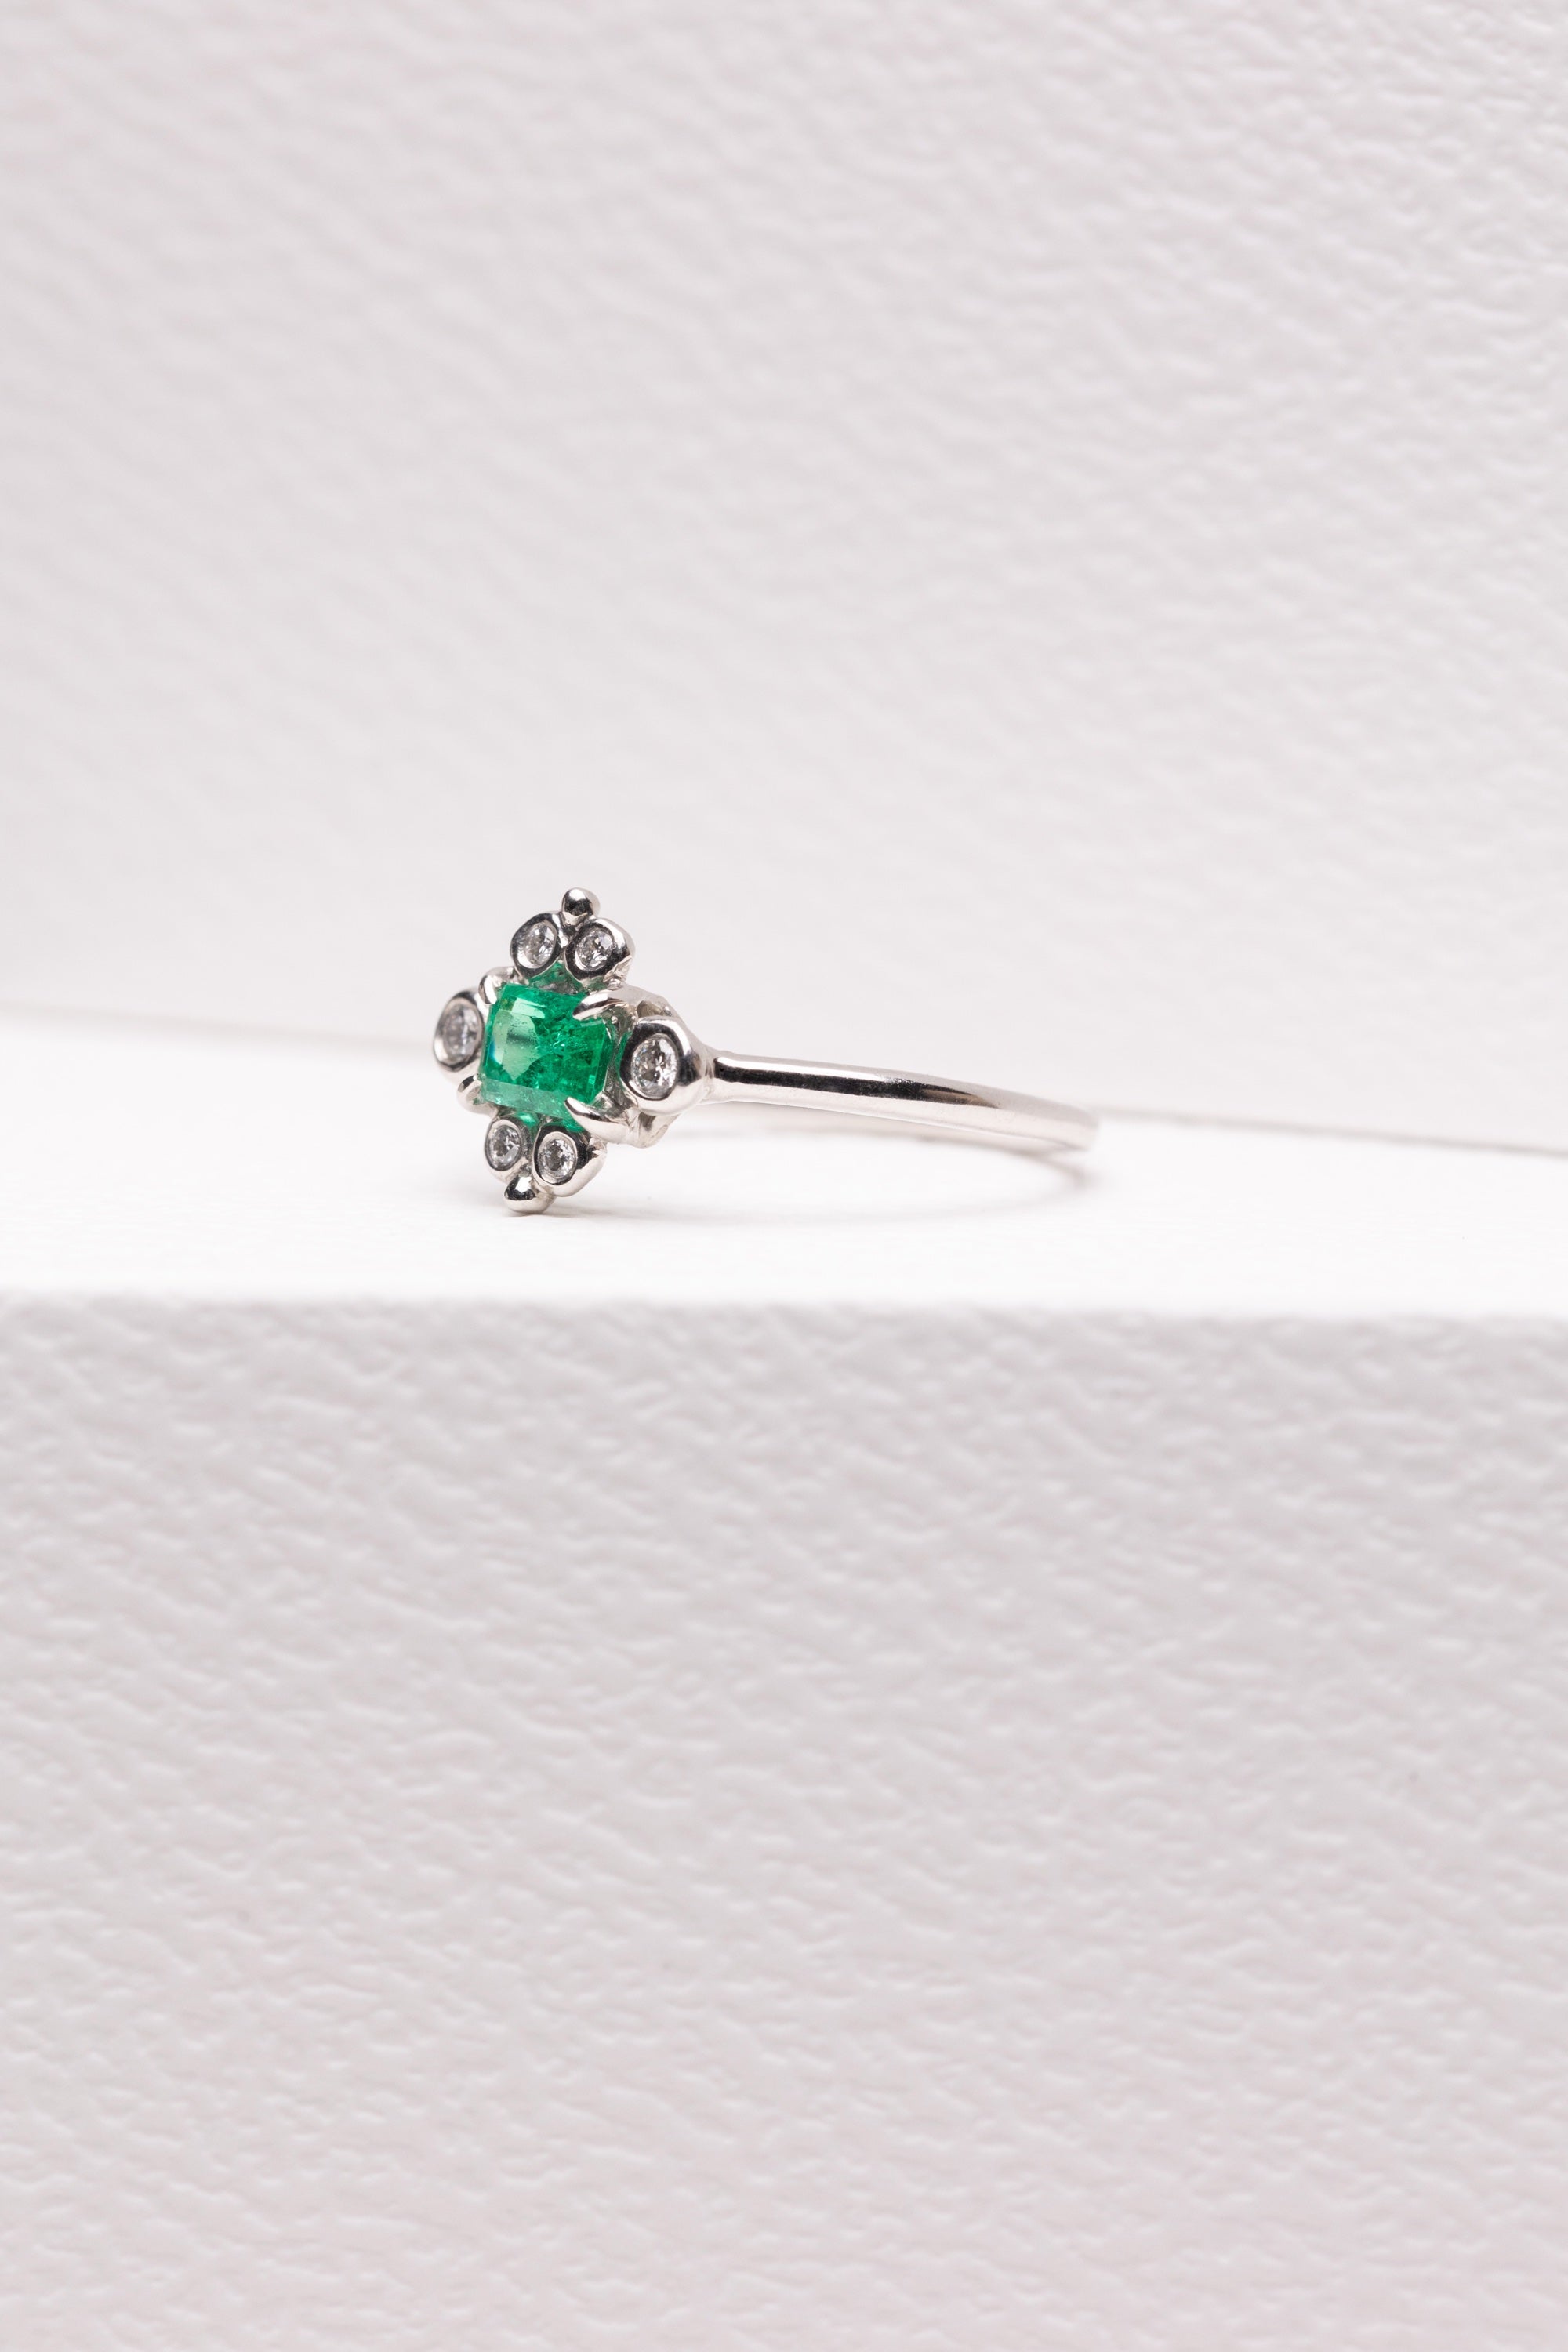 Bright Emerald Platinum Ring Surrounded by White Diamonds